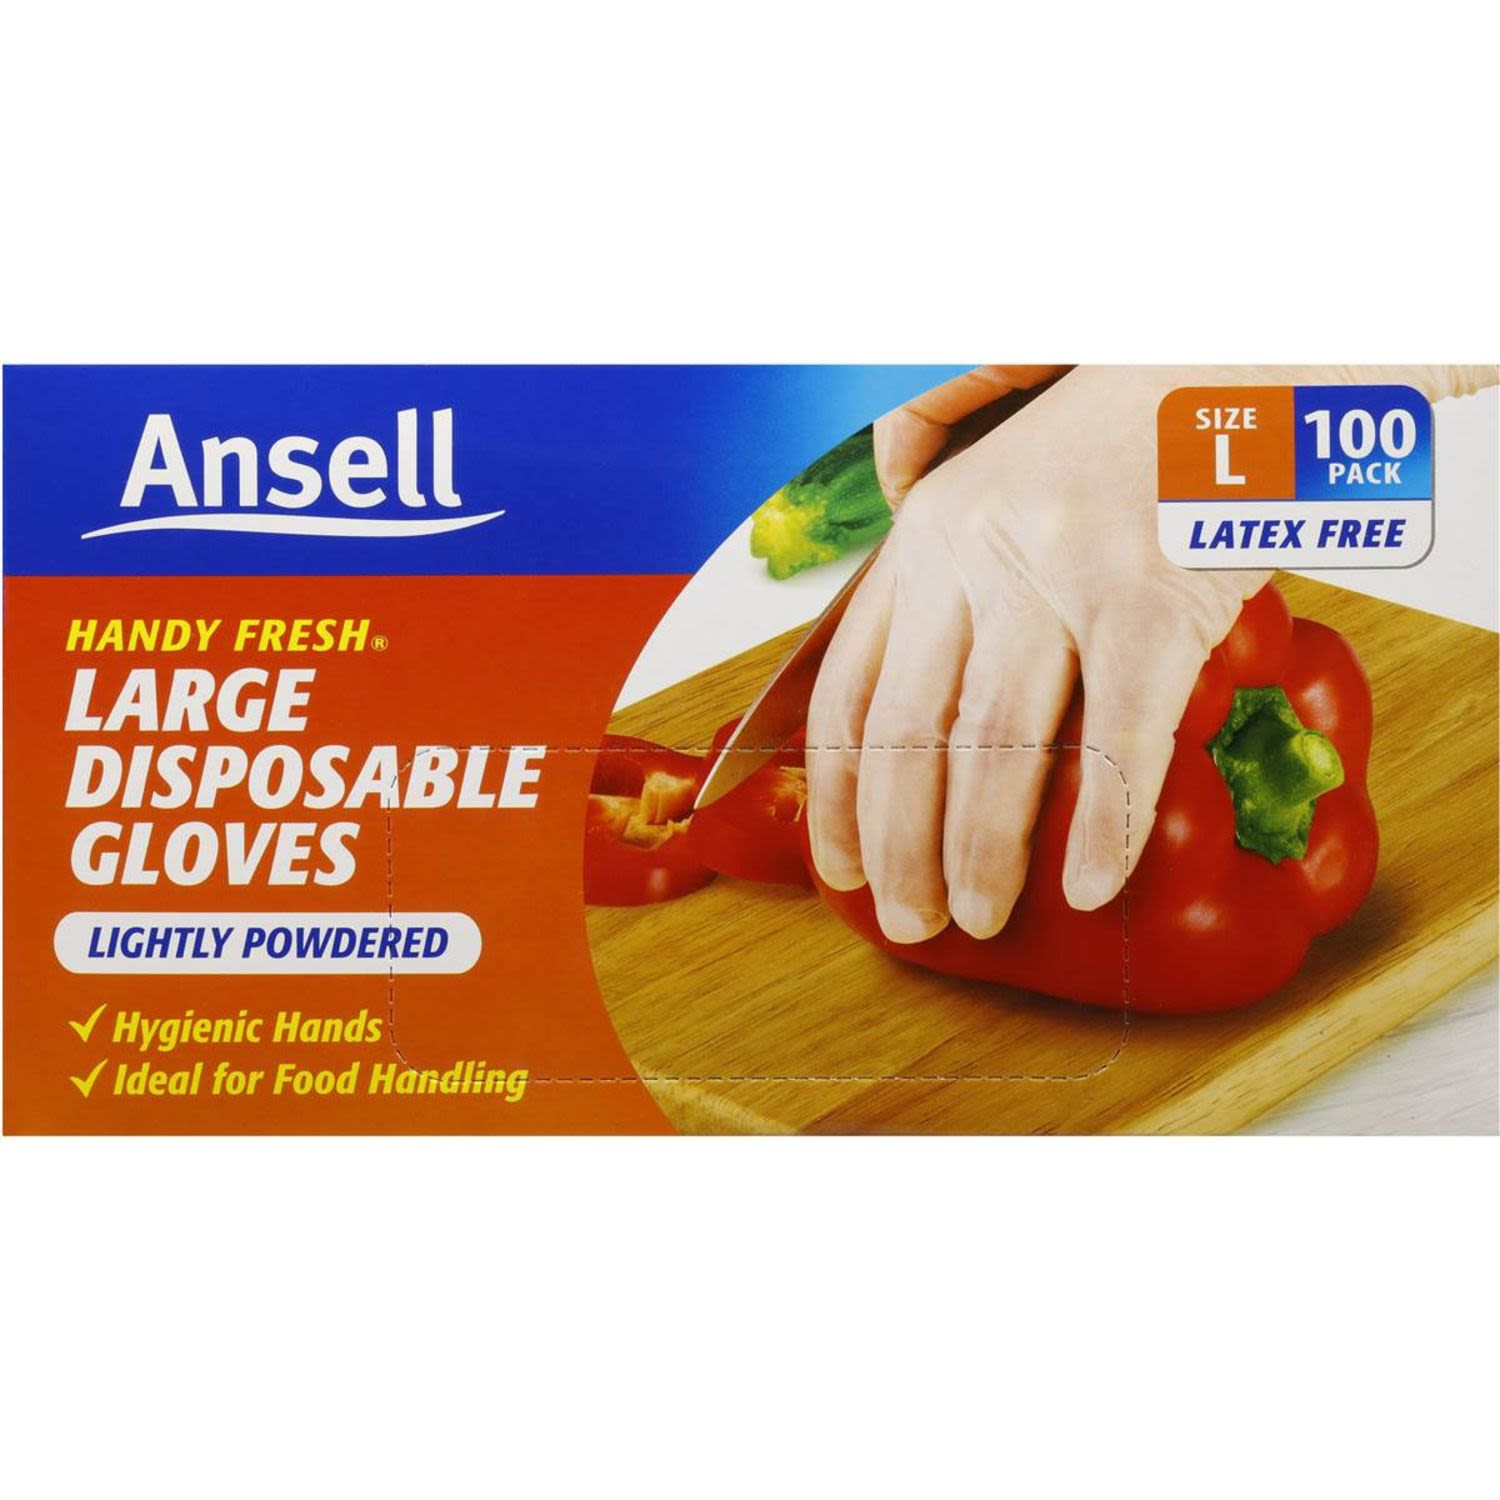 Ansell Gloves Handy Fresh Disposable Large, 100 Each